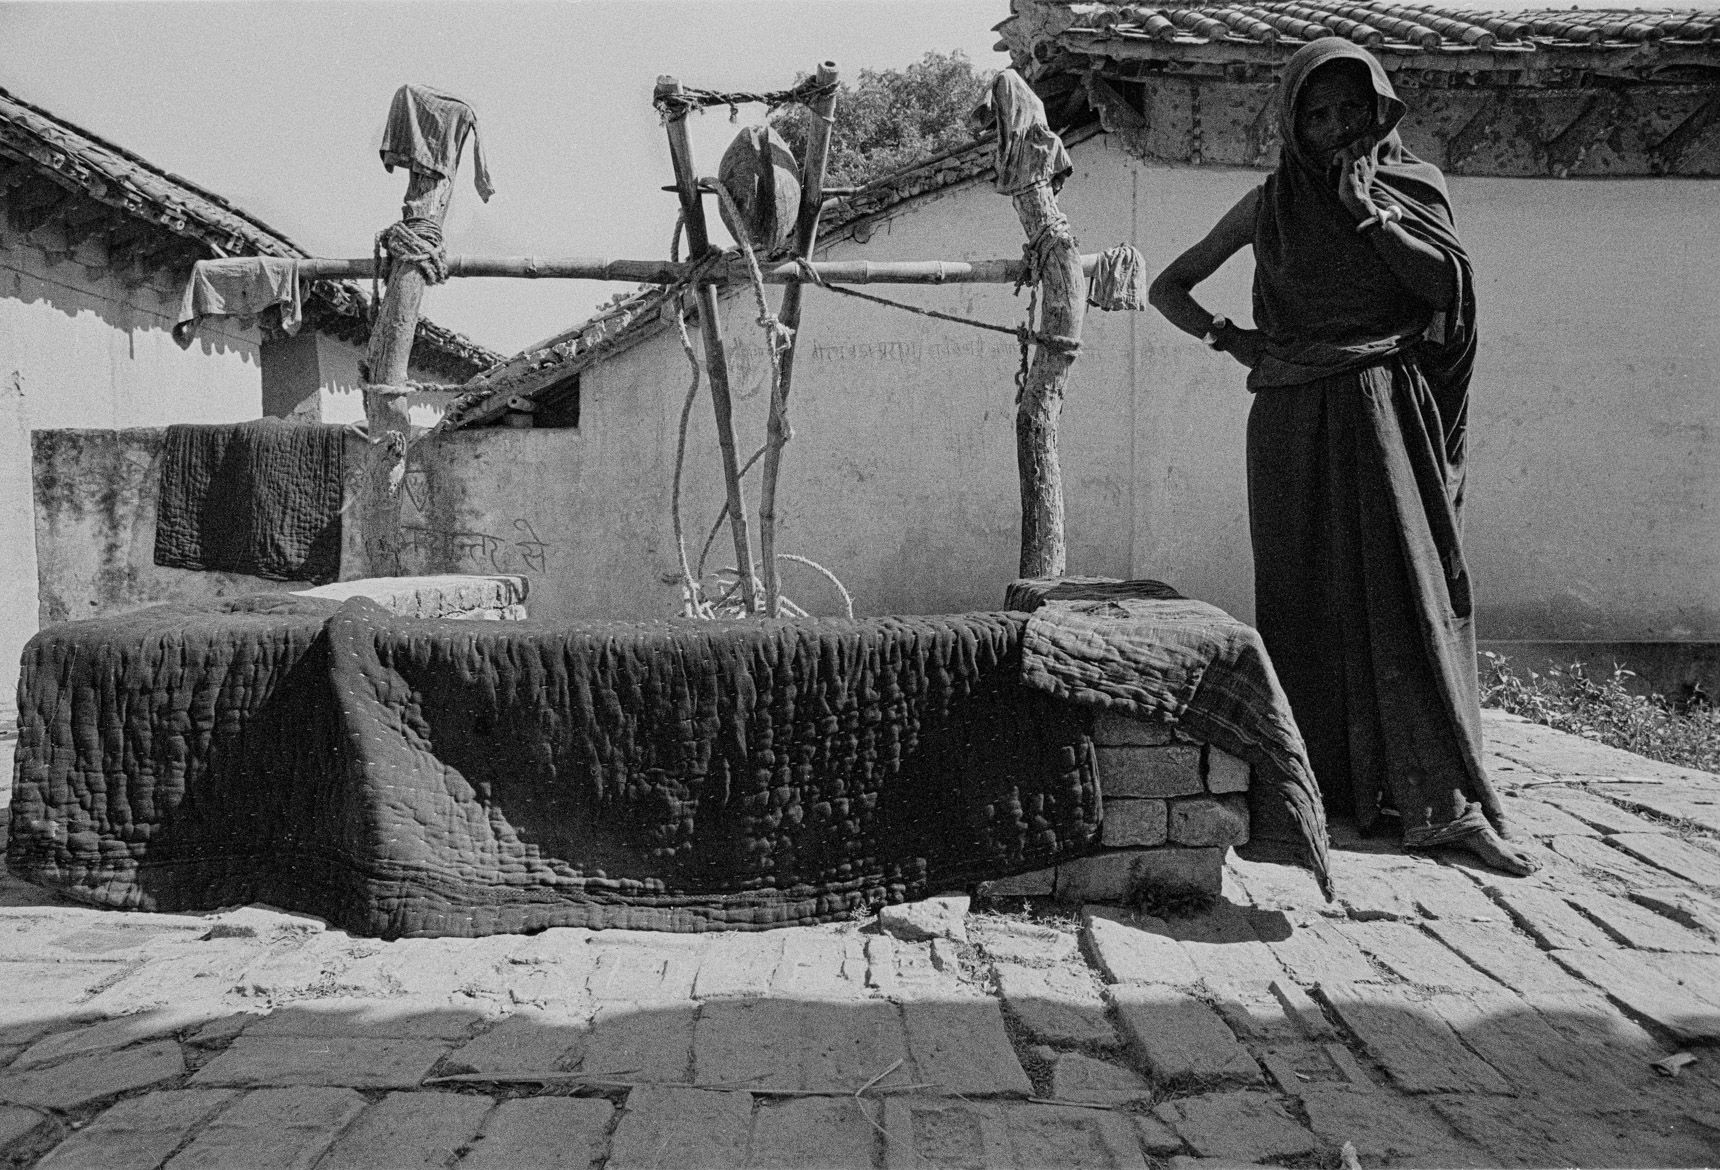 Portrait of rural Indian Village drying blankets